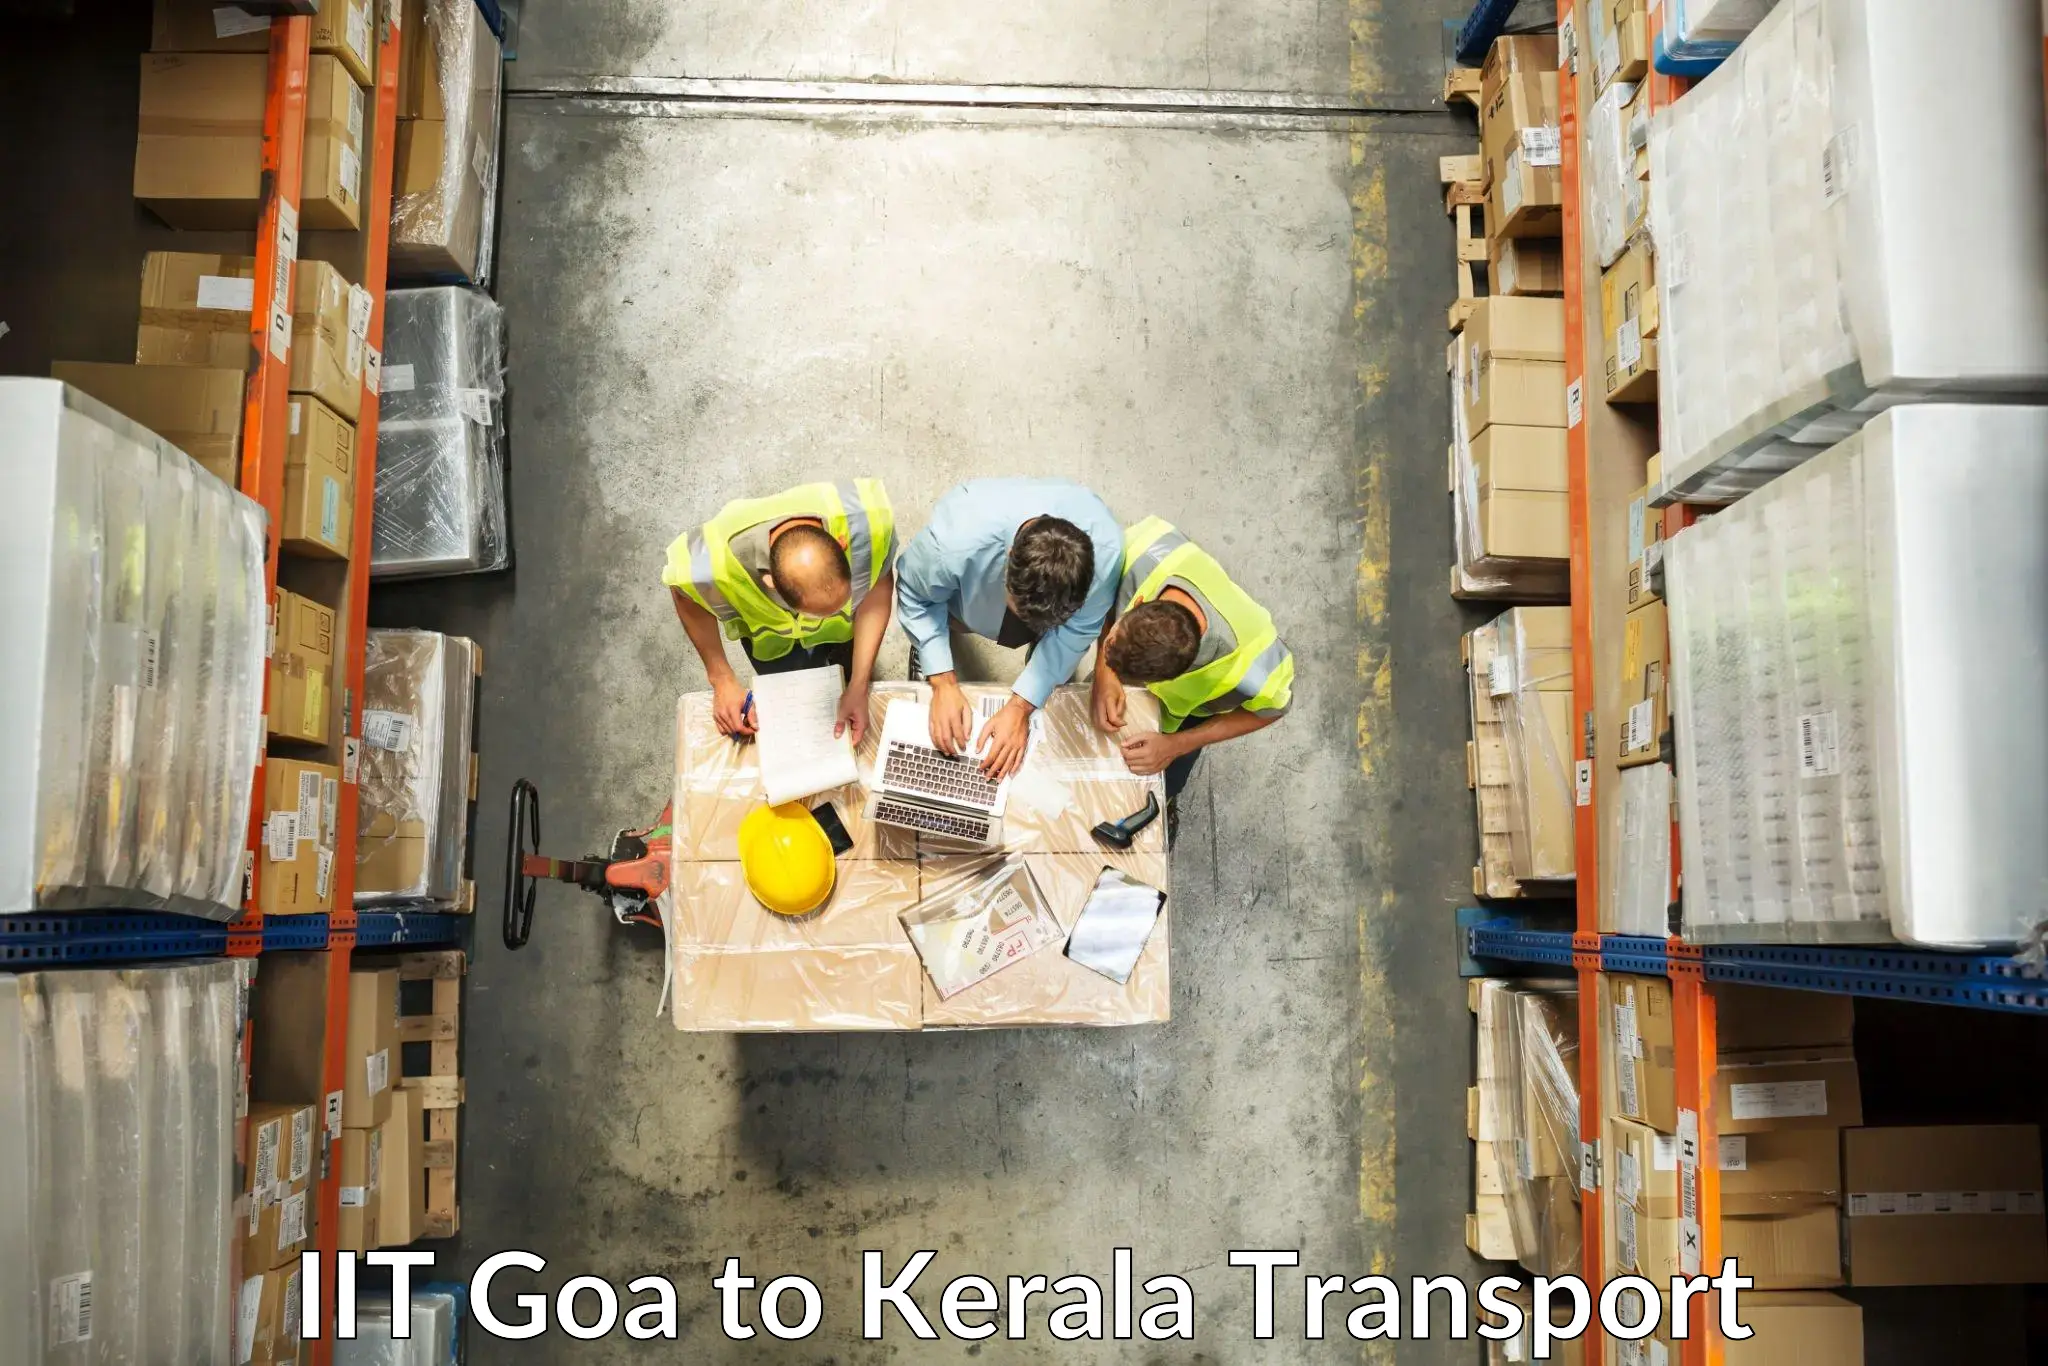 Transport bike from one state to another IIT Goa to Idukki